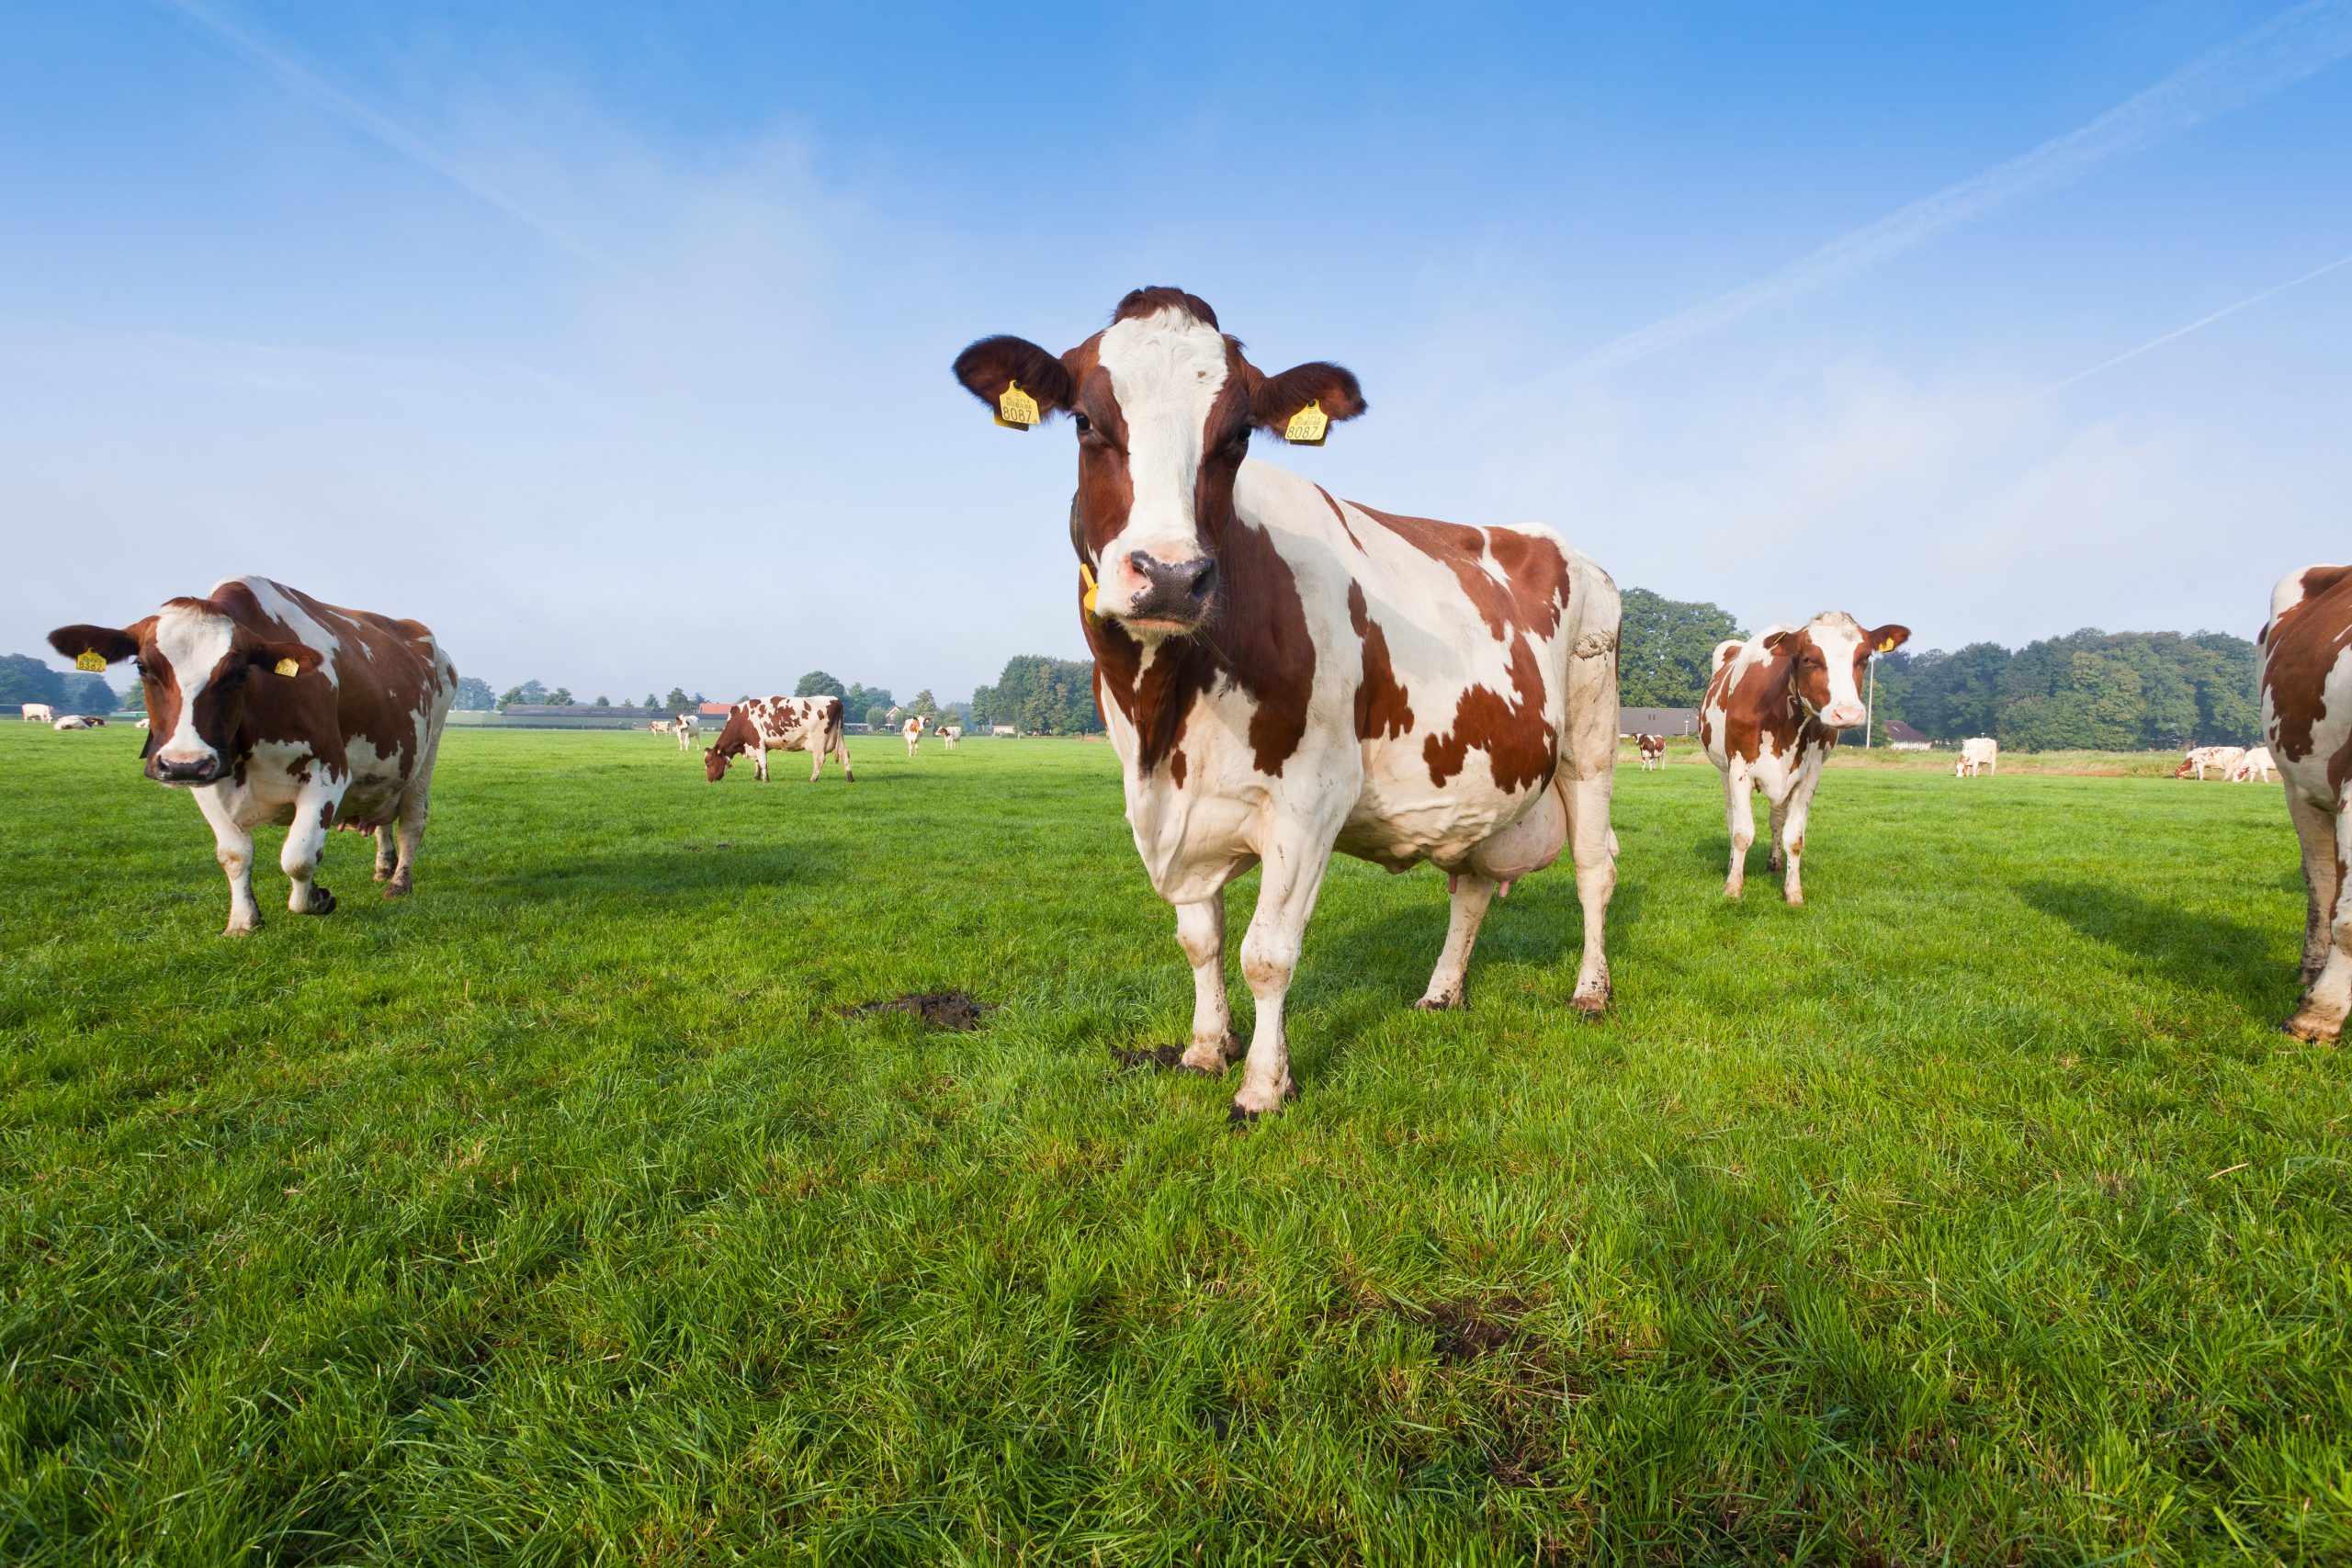 Feed supplement drops methane by 58%